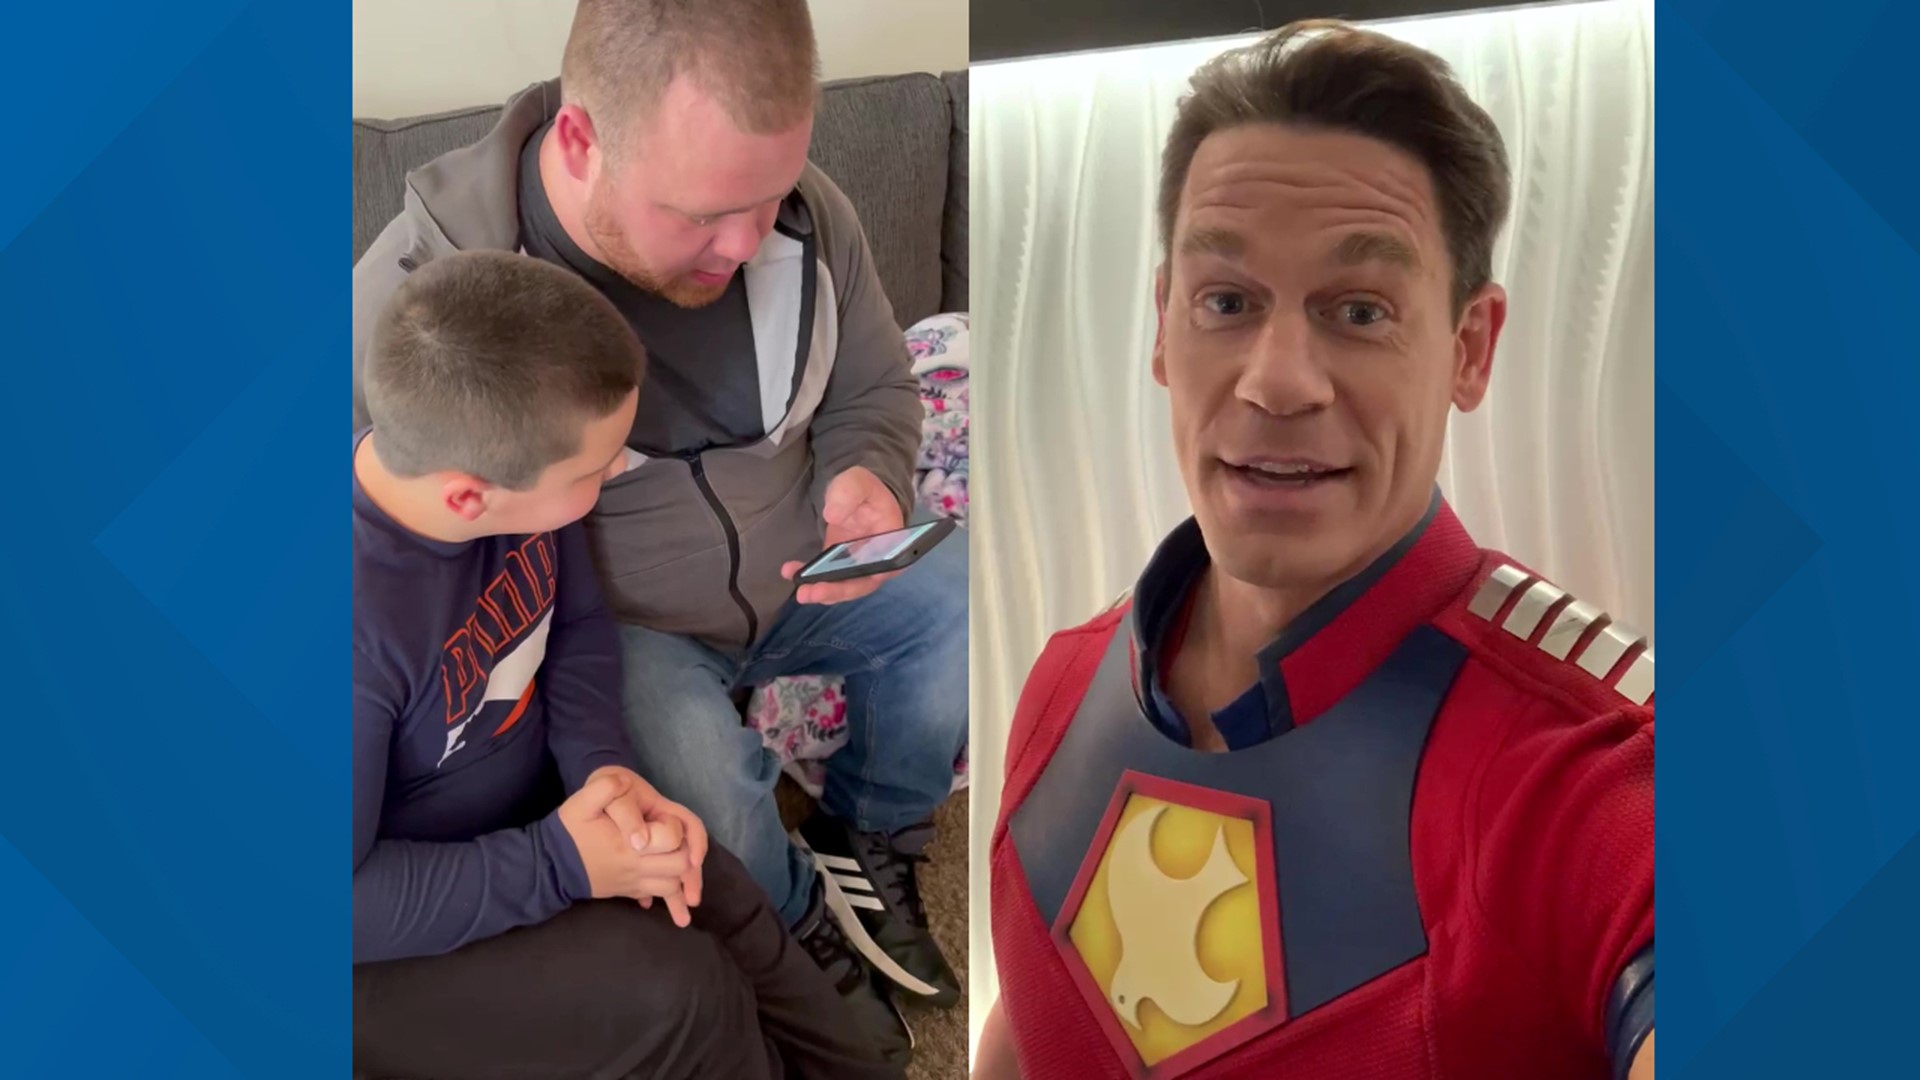 Jaxson Dempsey saved his sister from choking earlier this month and credits Cena for showing him how to save someone in that situation.